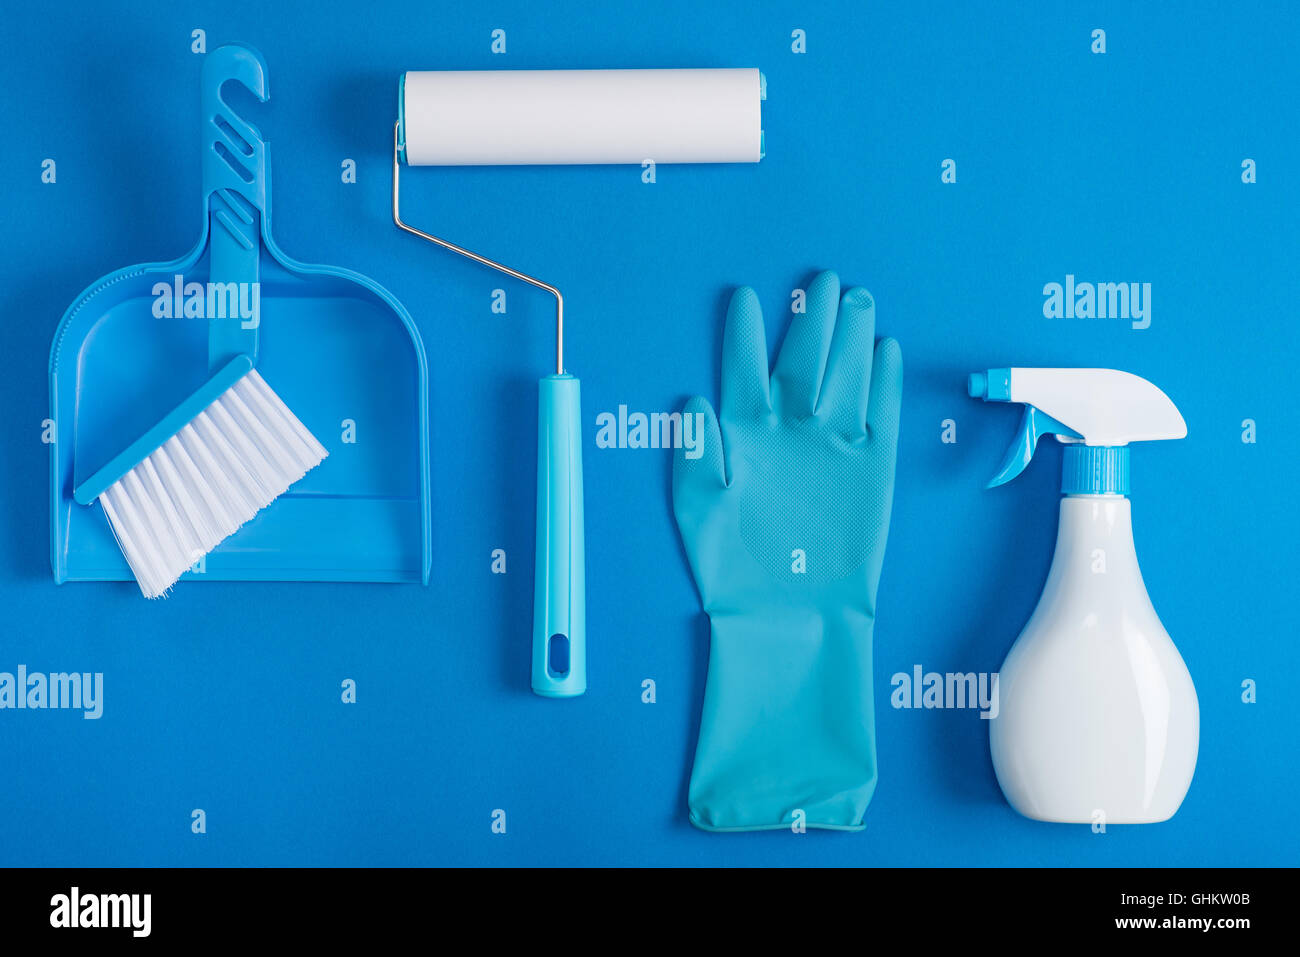 Cleaning tools layout Stock Photo